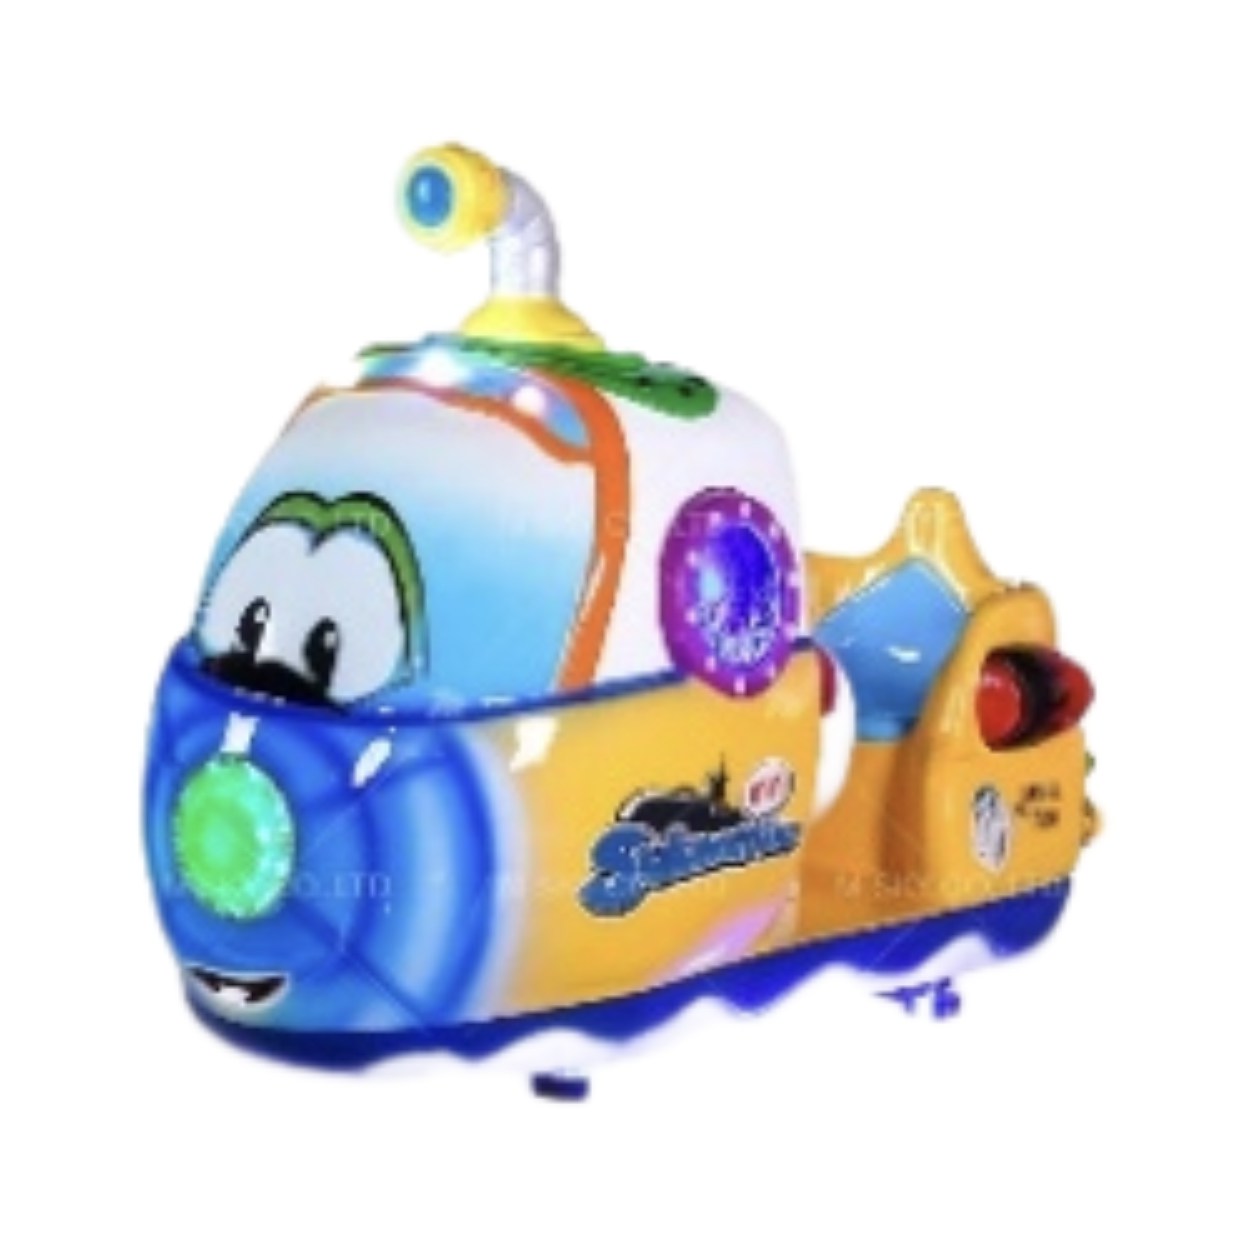 Most Popular Mechanical Kiddie Ride For Sale Made In China